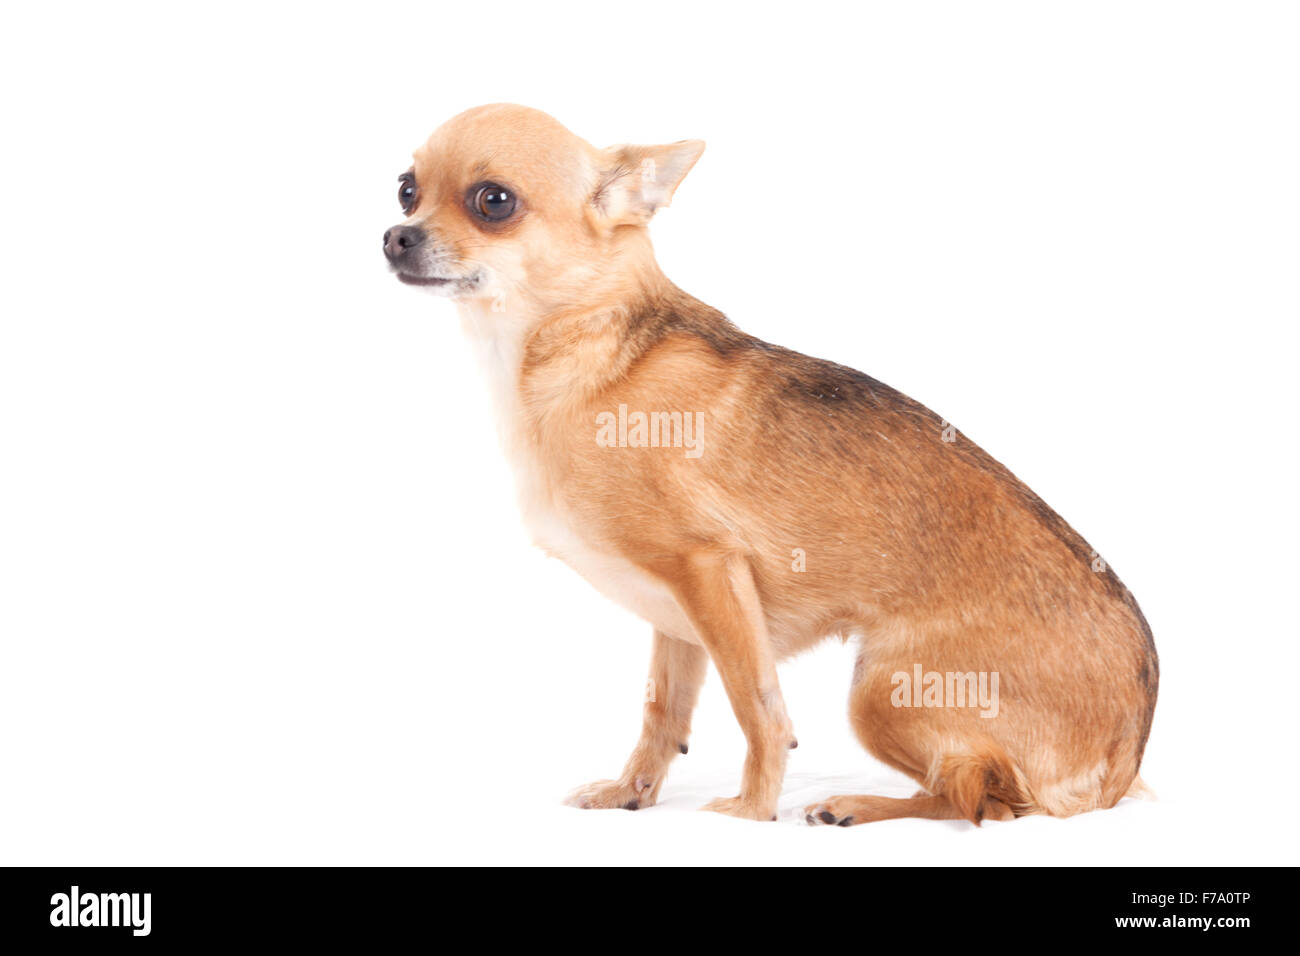 Happy dog photographed in the studio on a white background Stock Photo